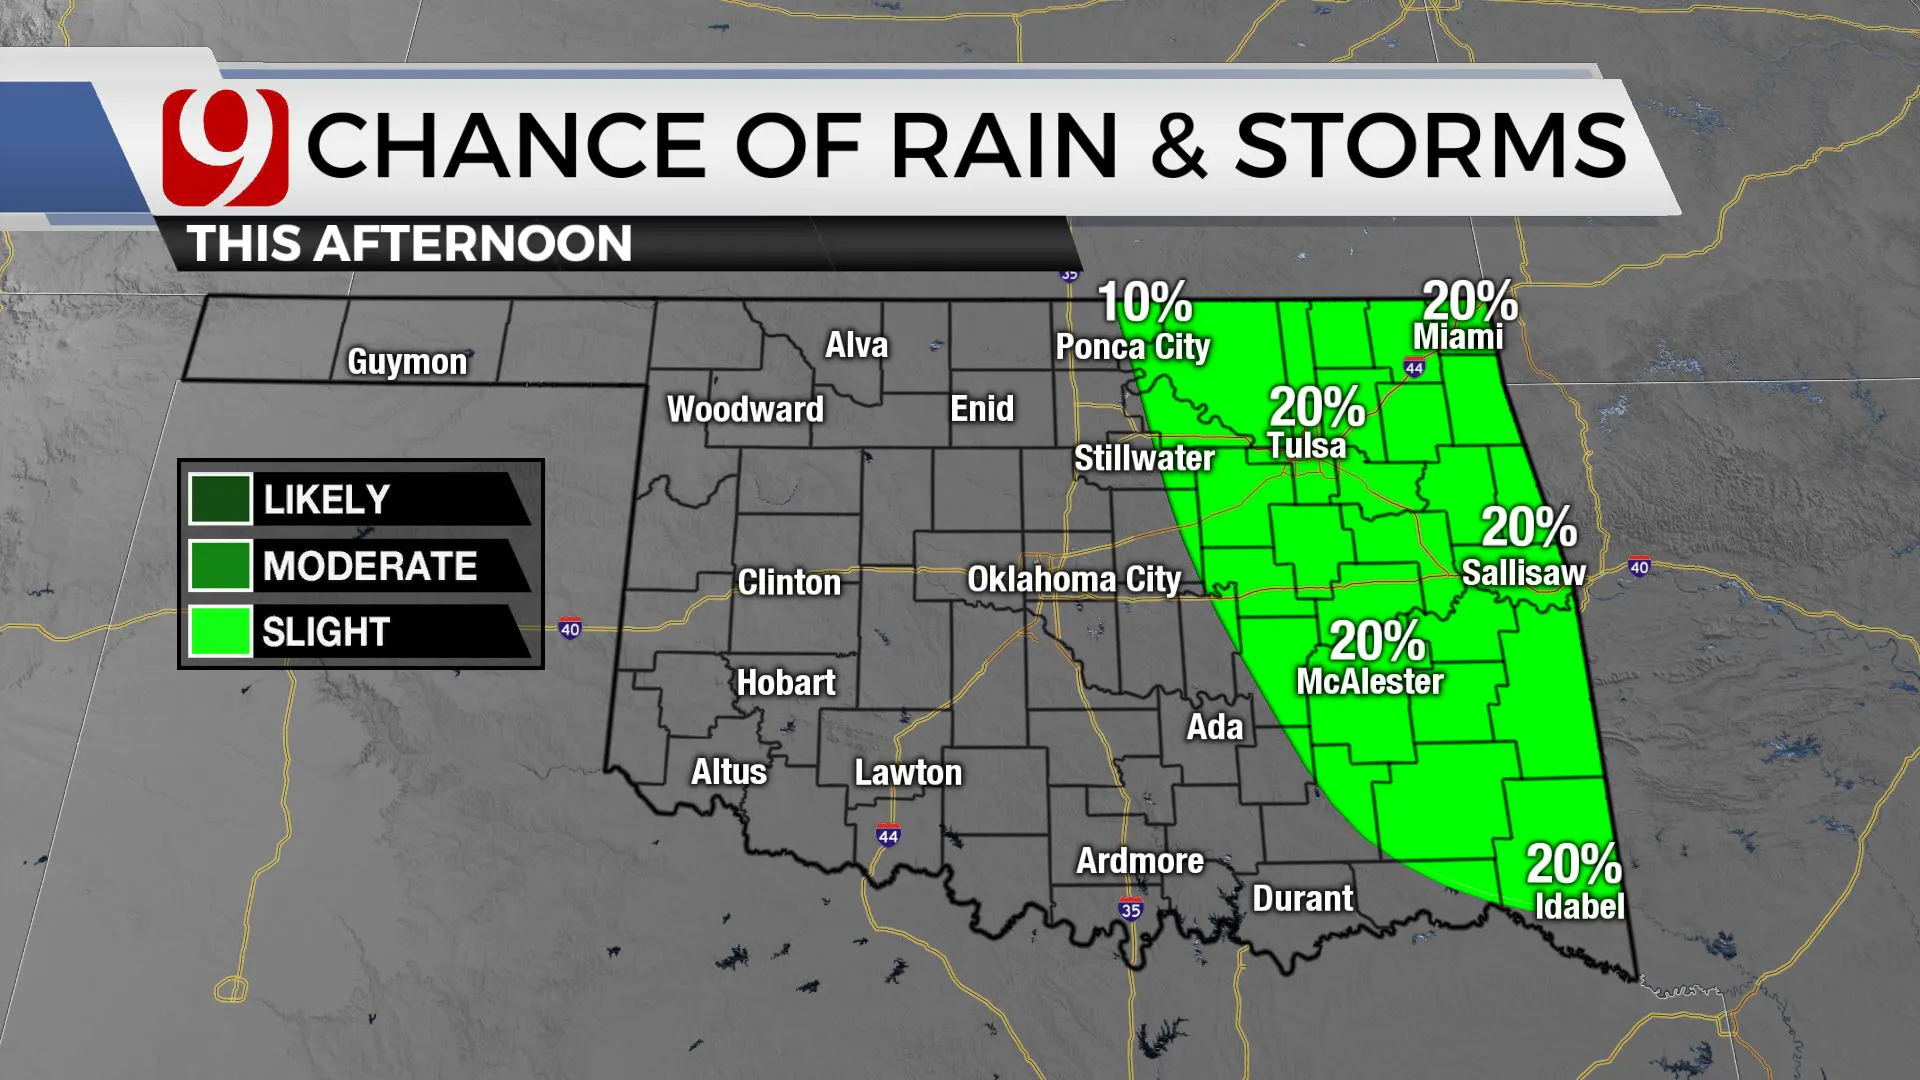 Chances of rain and storms in Oklahoma this afternoon